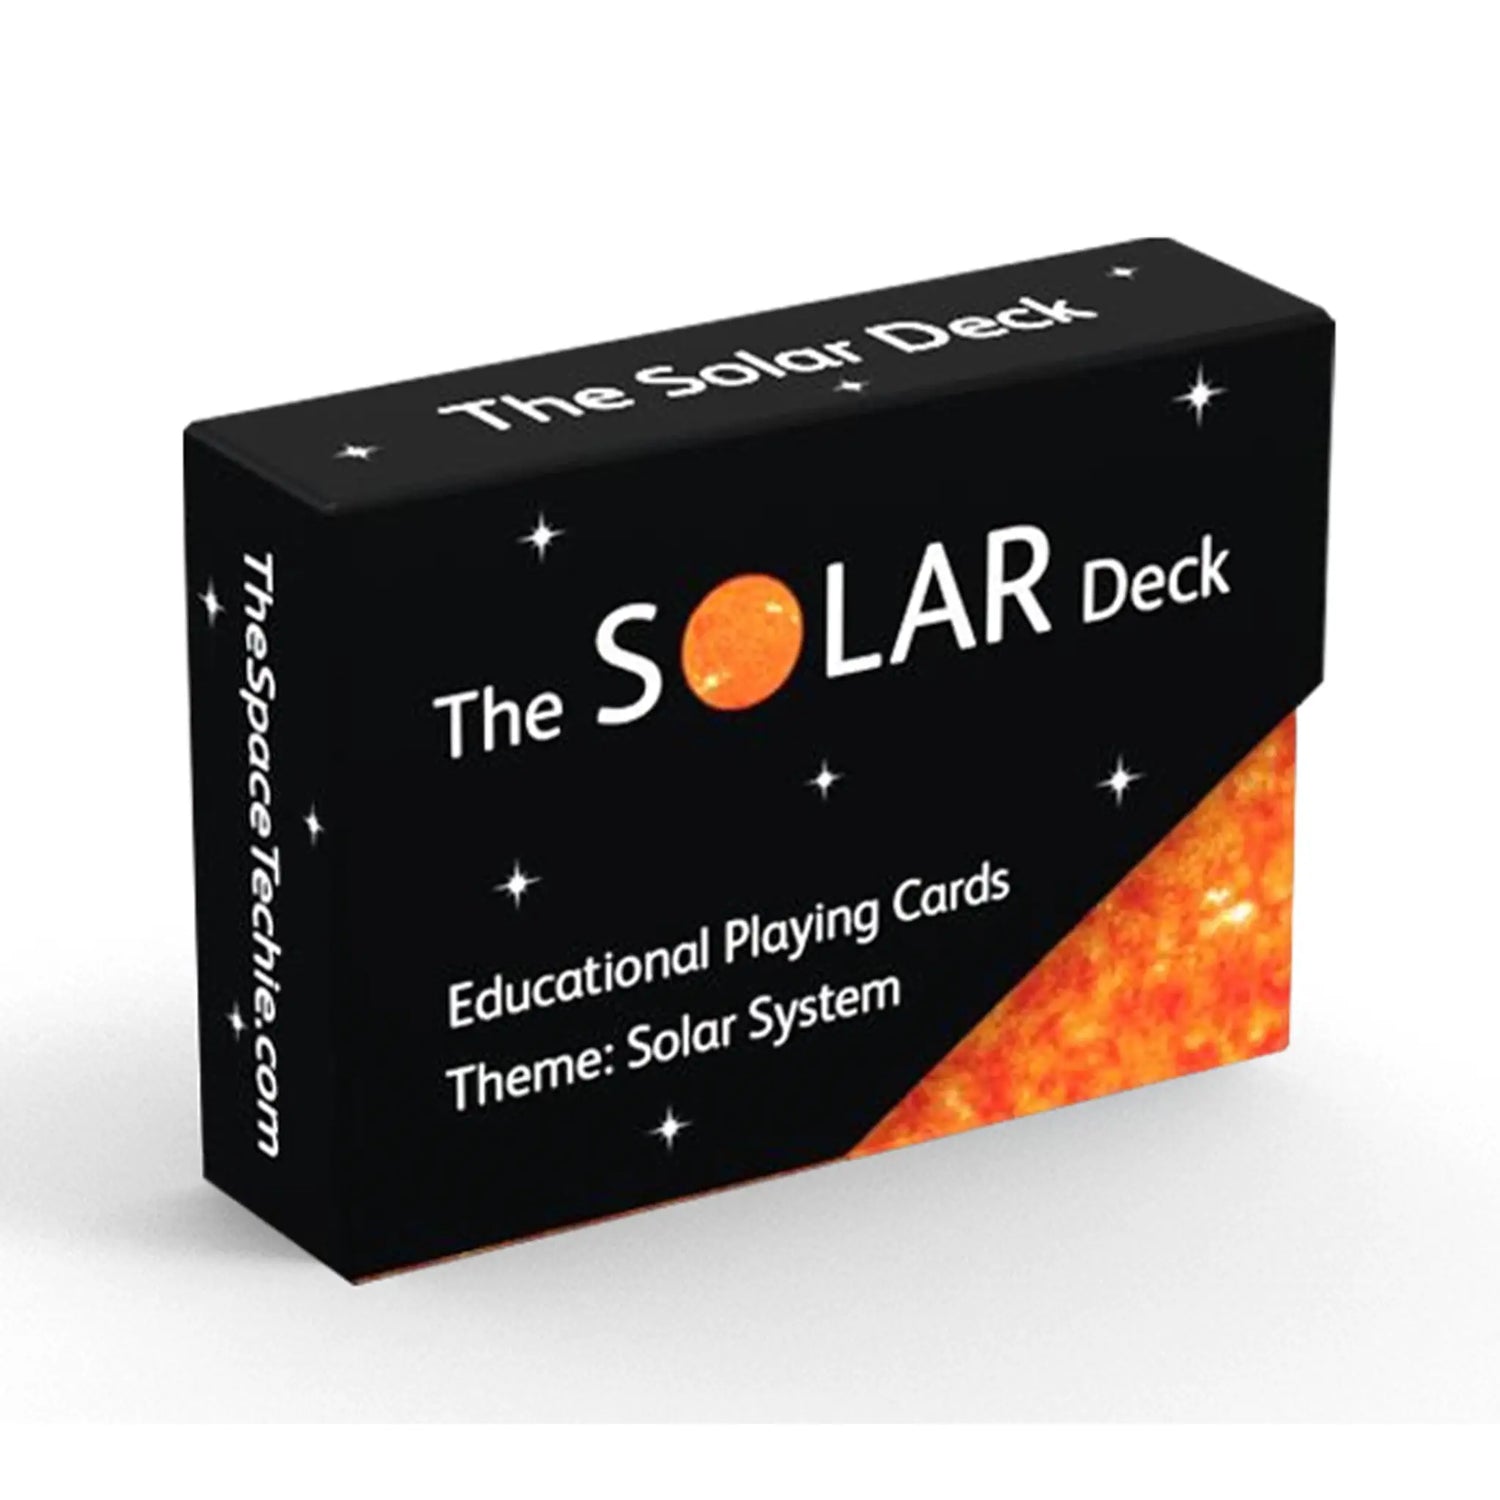 The Solar Deck playing cards by Liquid Bird